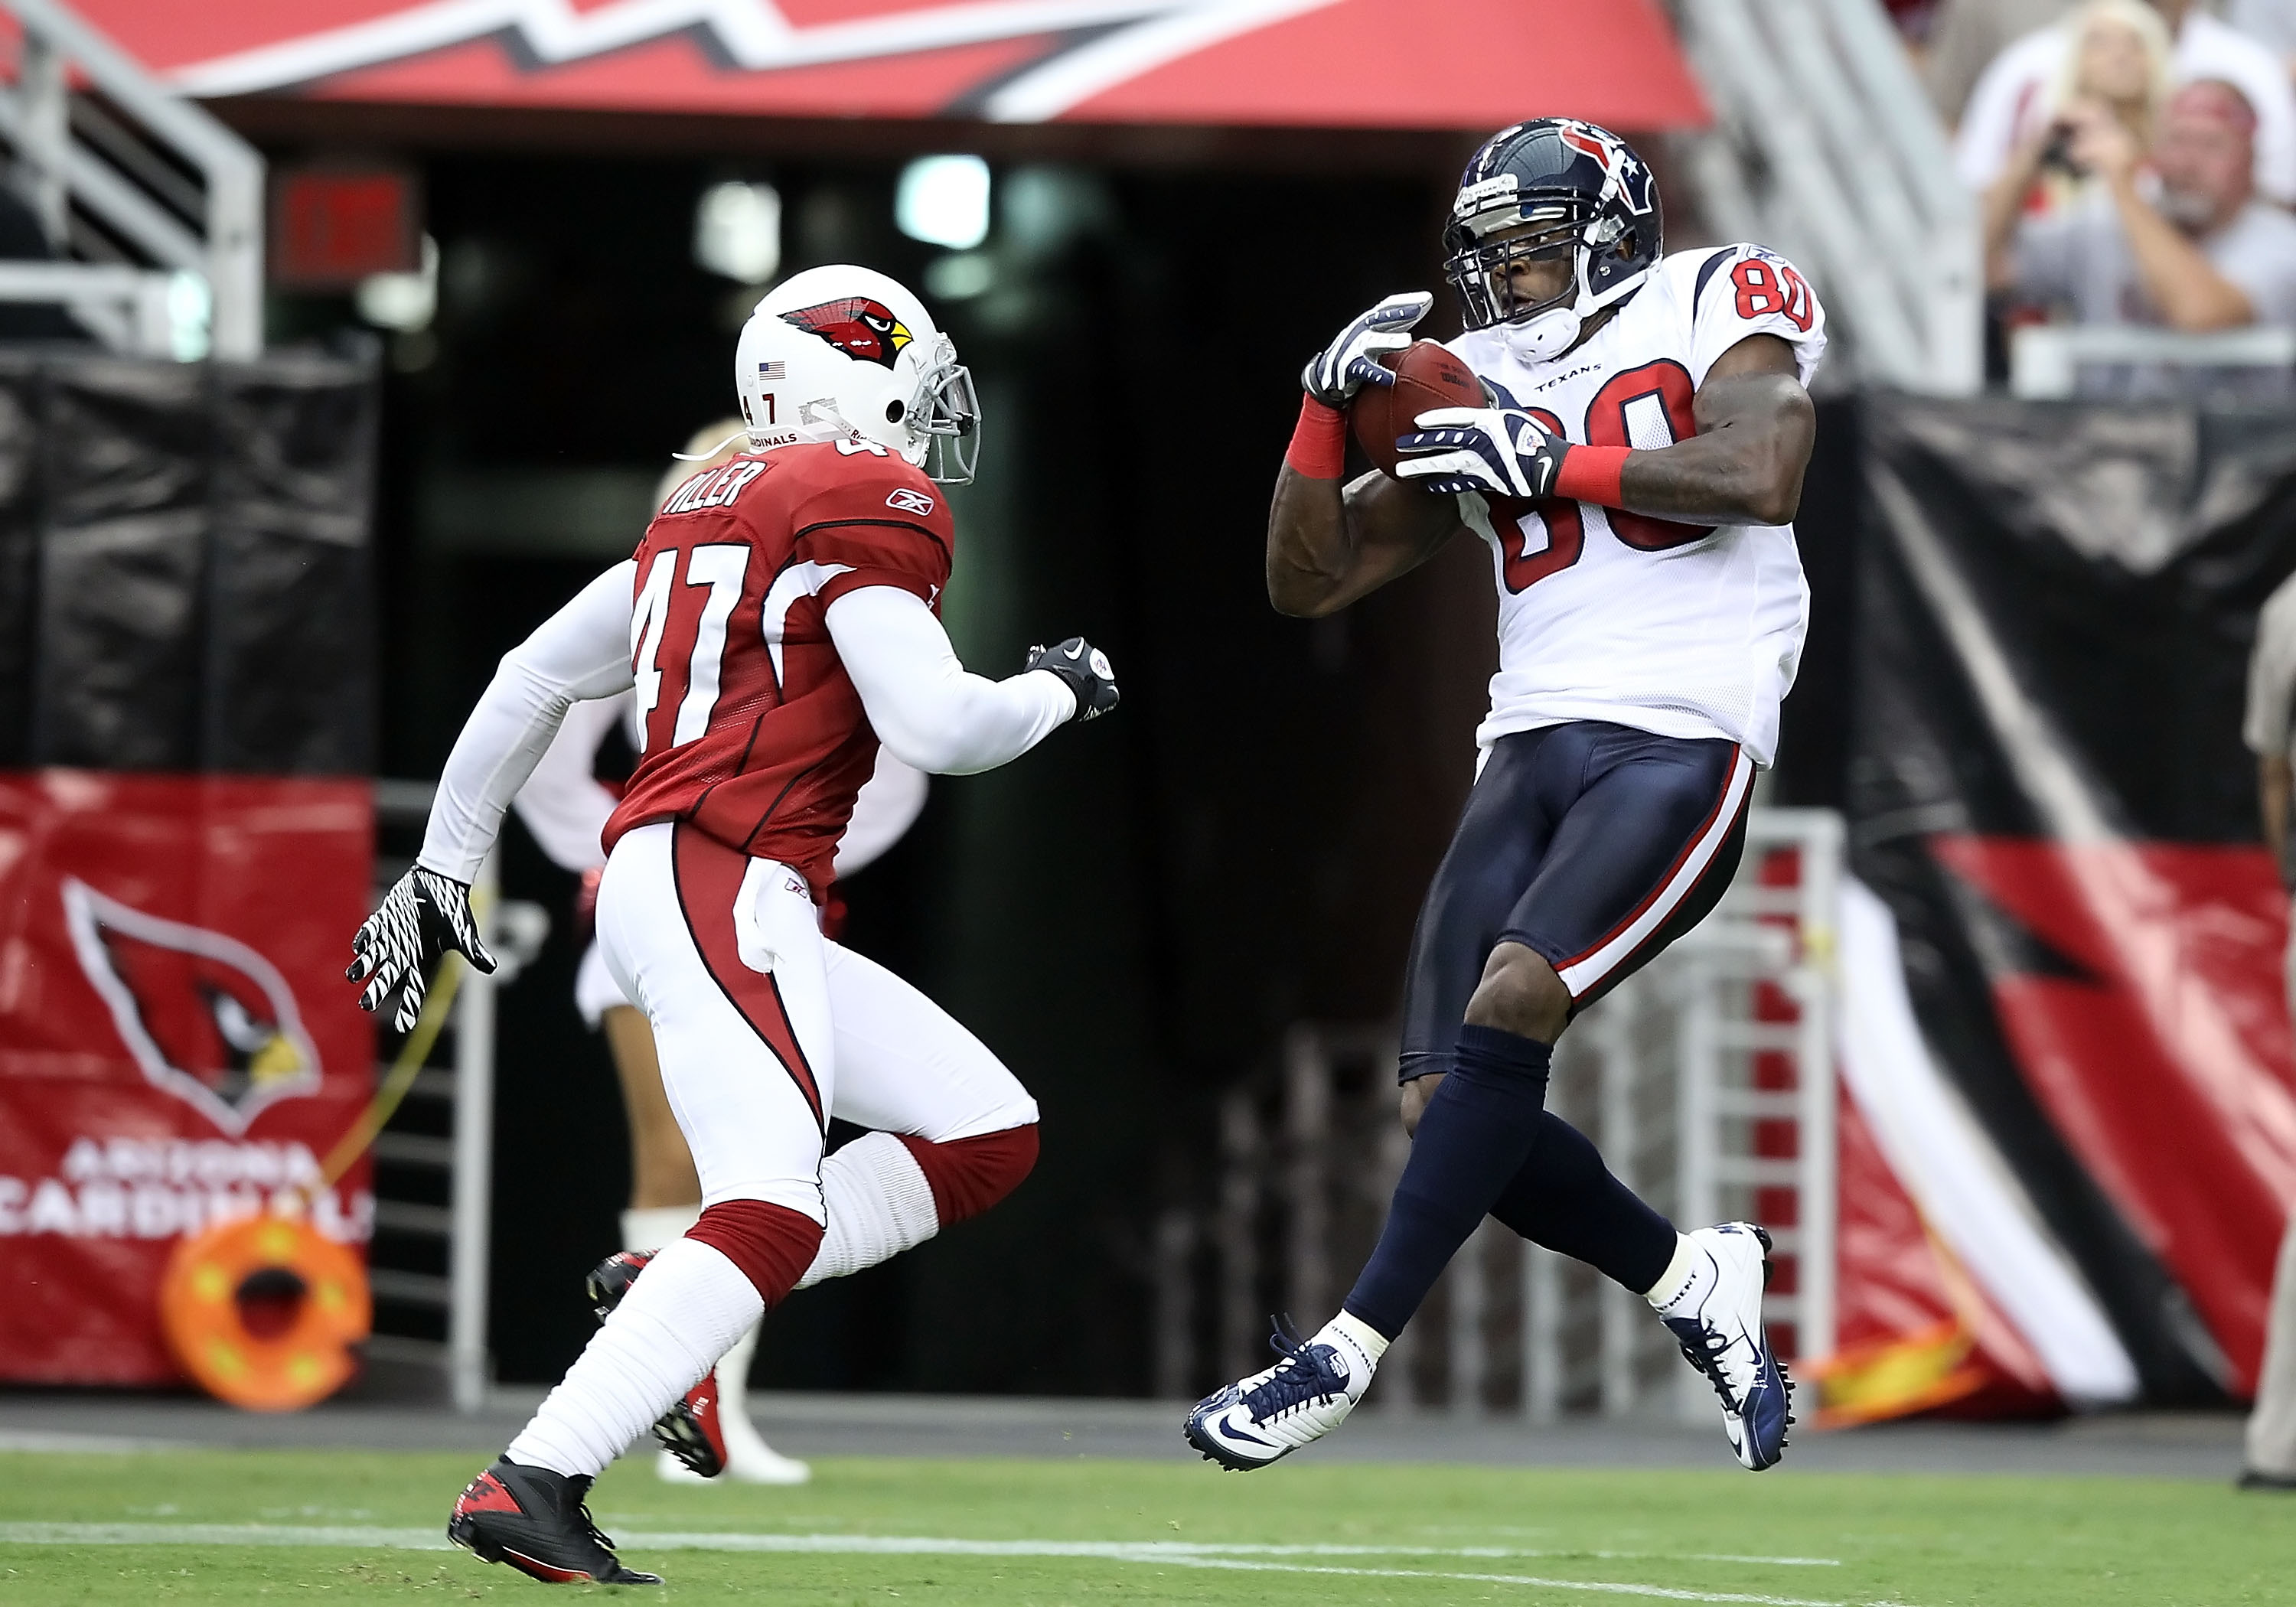 GLENDALE, AZ - AUGUST 14:  Wide receiver Andre Johnson #80 of the Houston Texans catches a 44 yard touchdown reception past Justin Miller #47 of the Arizona Cardinals during preseason NFL game at the University of Phoenix Stadium on August 14, 2010 in Gle